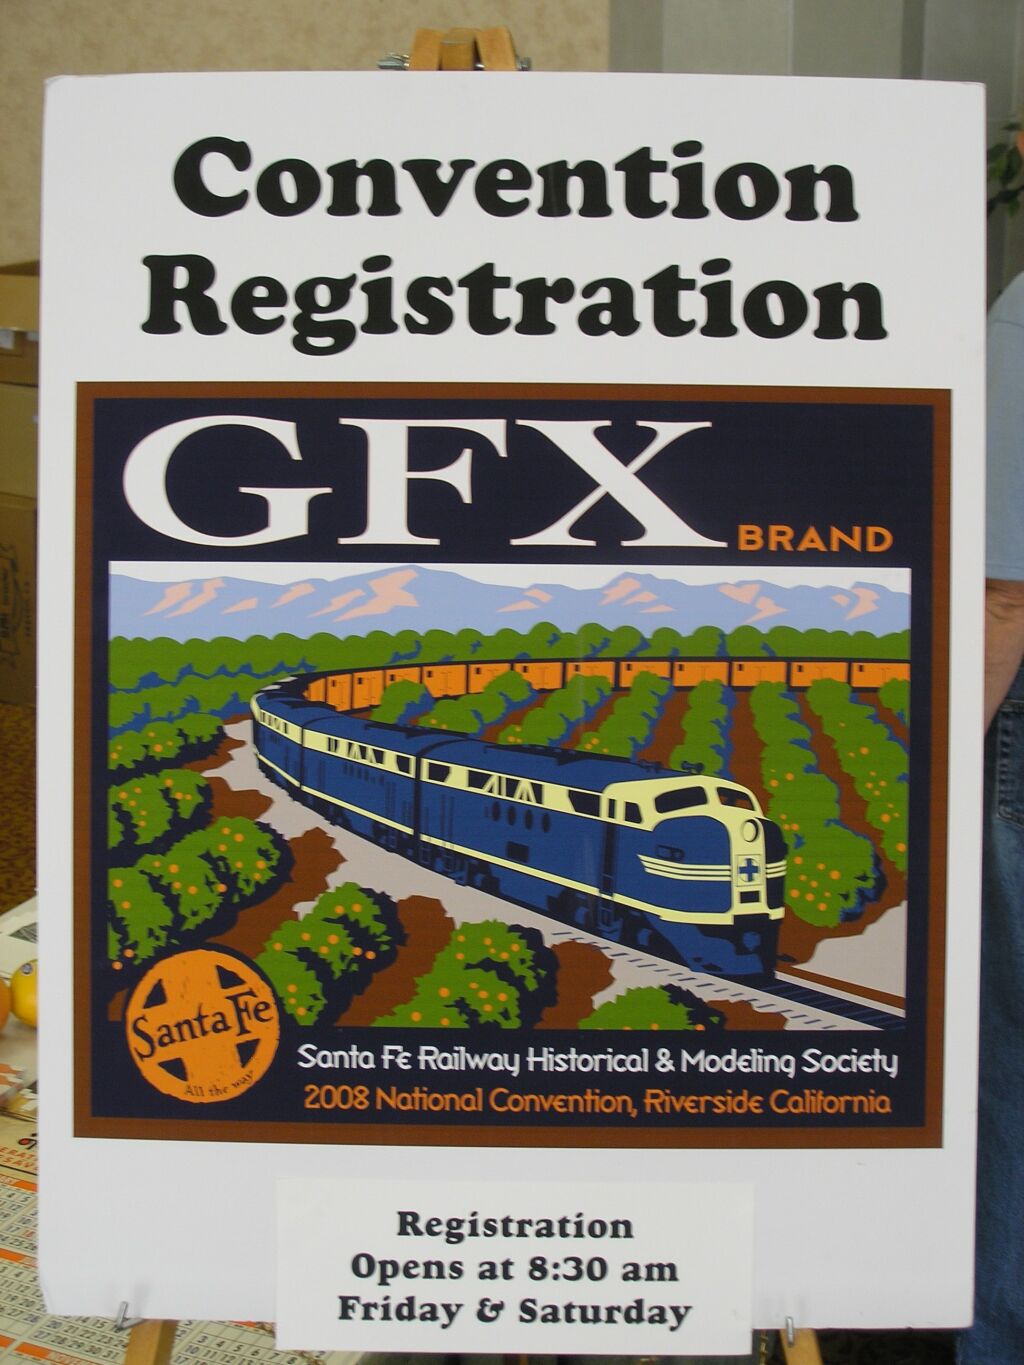 The GFX or Green Fruit Express - this years convention theme